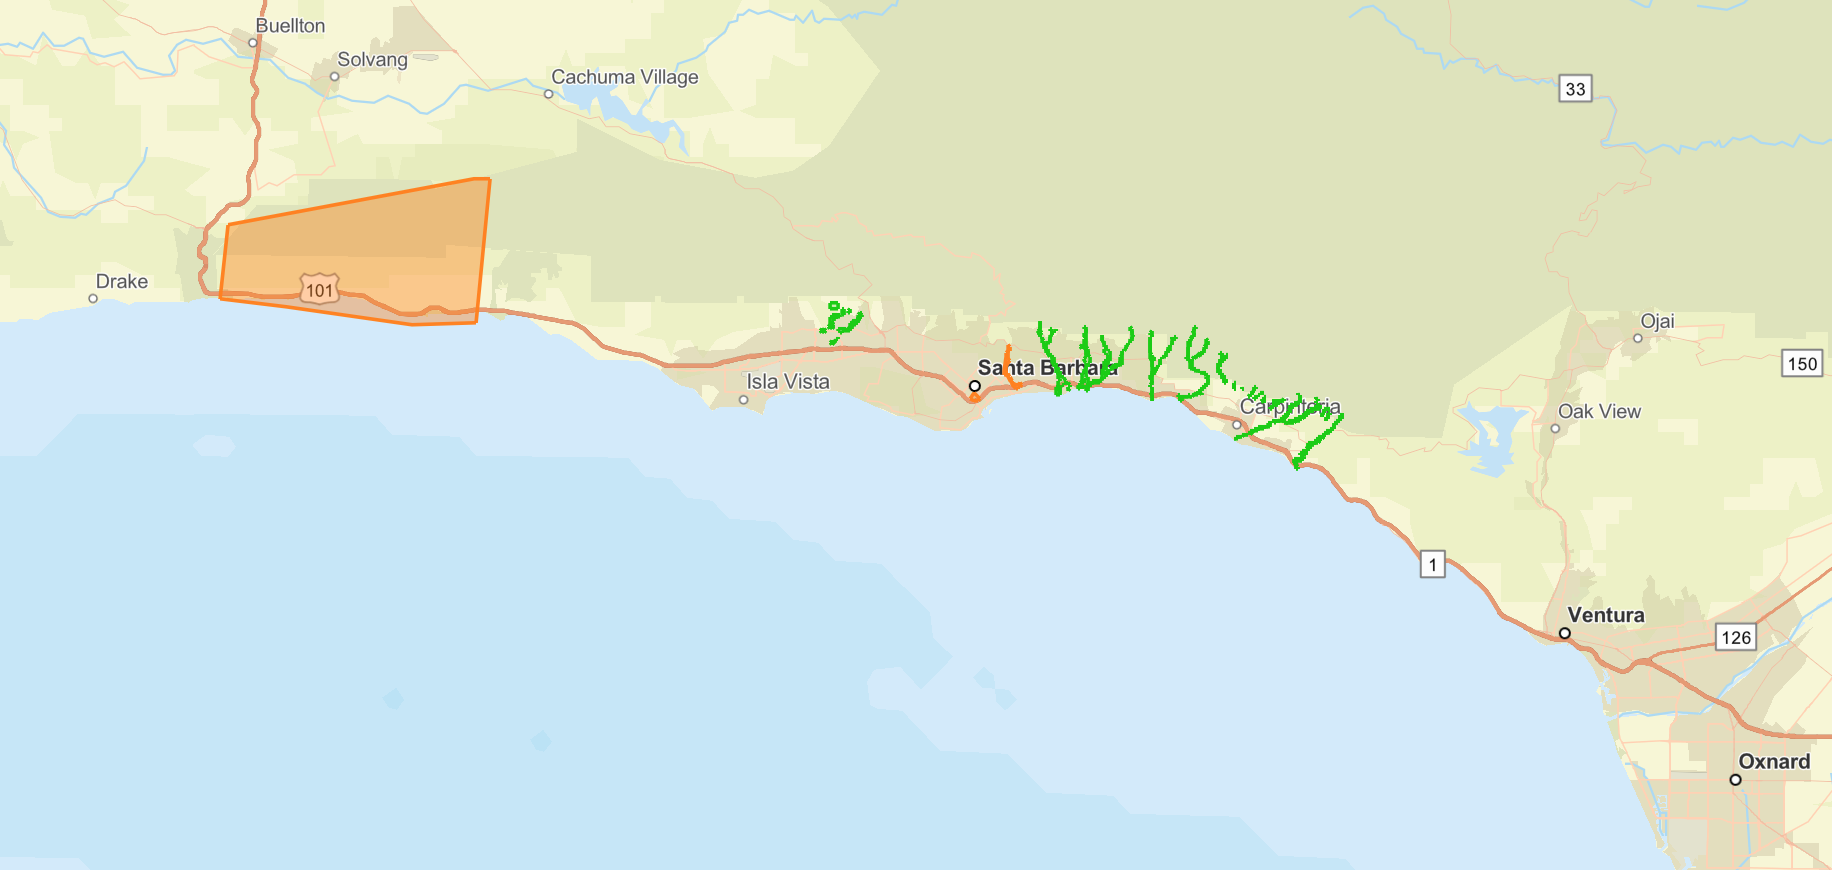 A map of evacuation orders in Santa Barbara County as of Tuesday morning. Active evacuation orders are in orange, while cancelled evacuation orders are in green.